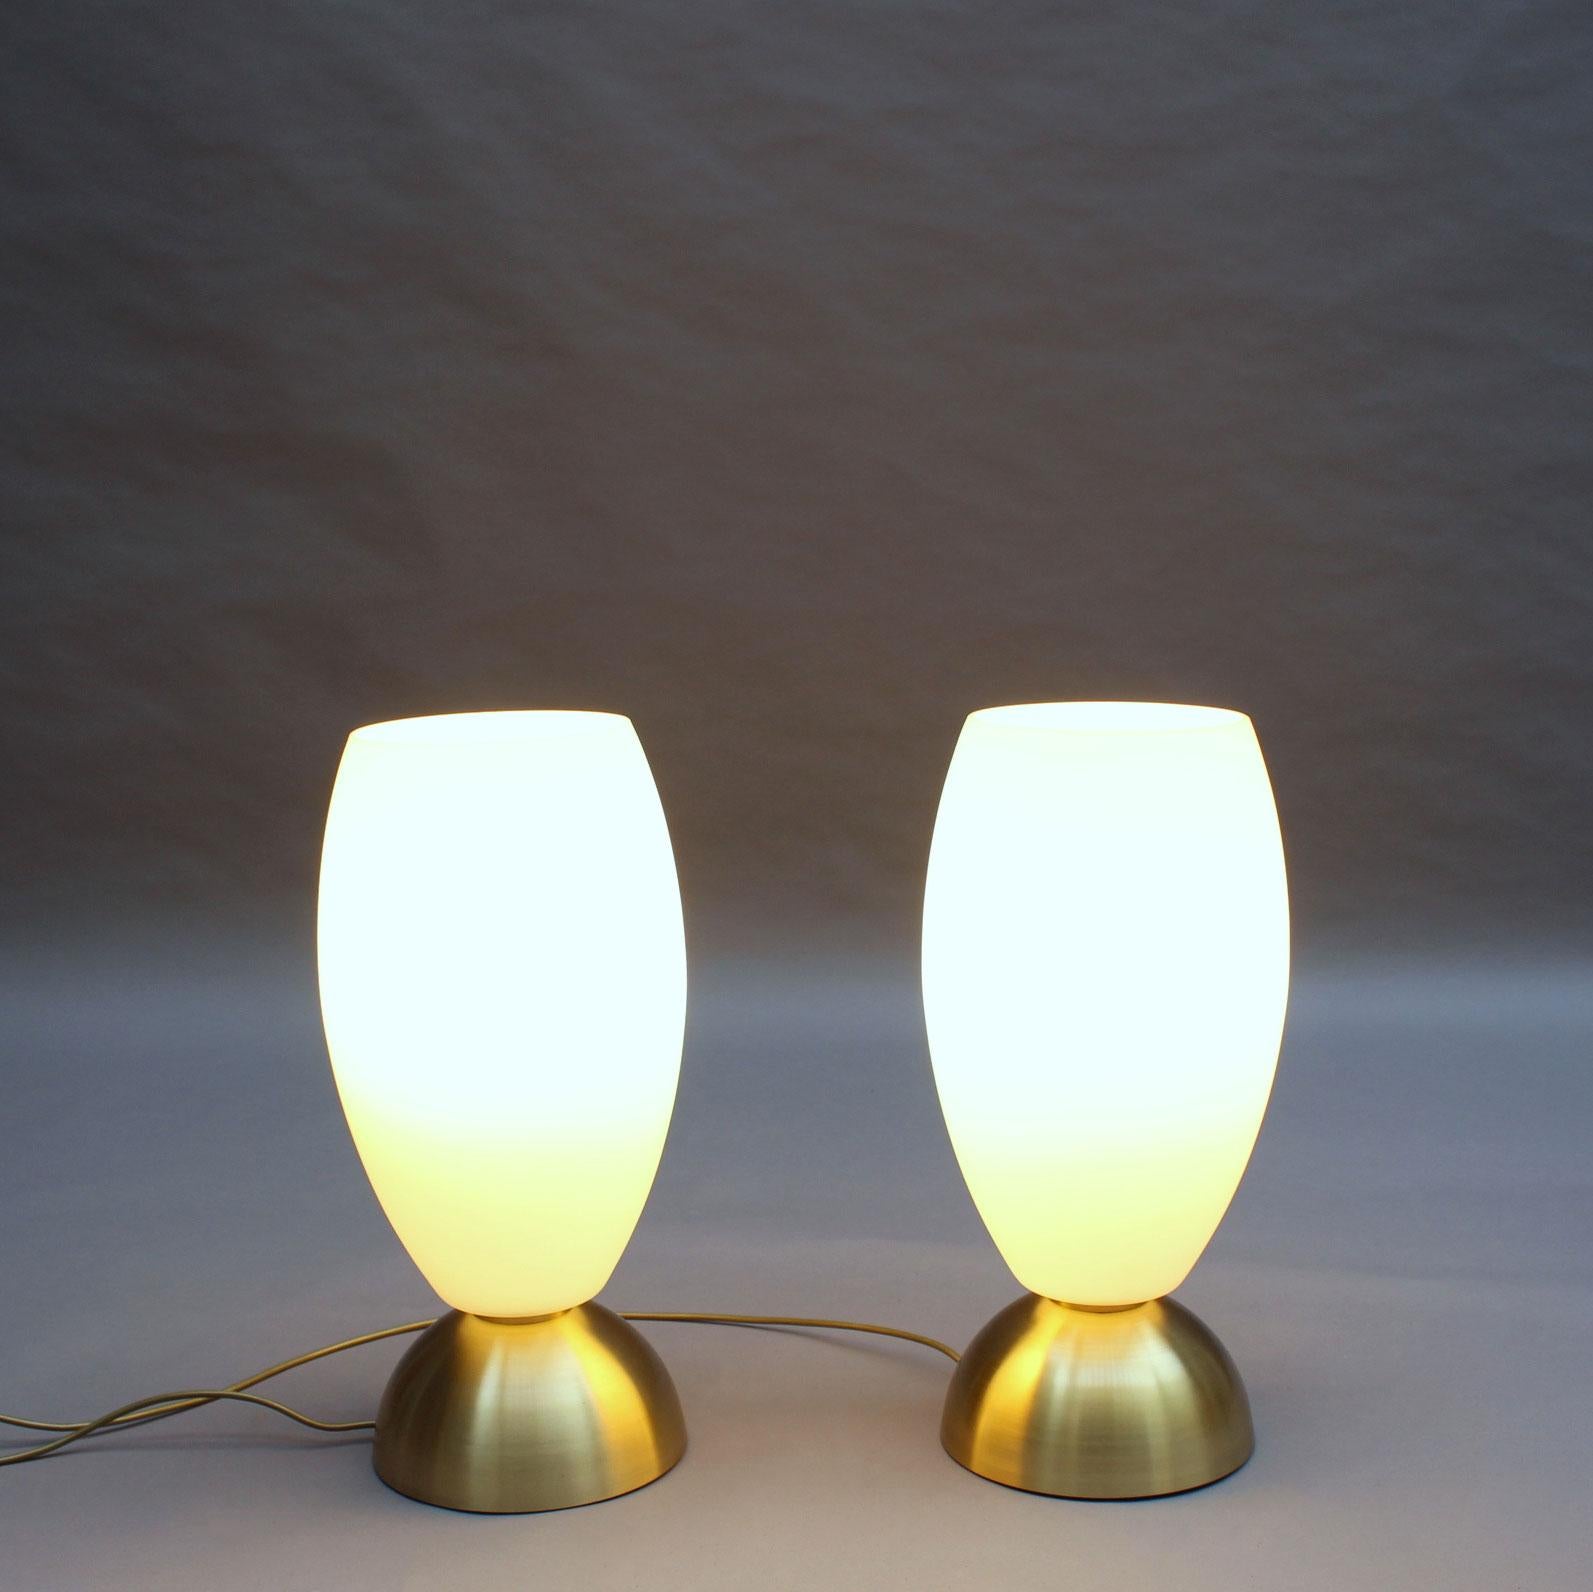 With a conical brass base that supports a frosted glass ogive shape diffuser.
Signed.